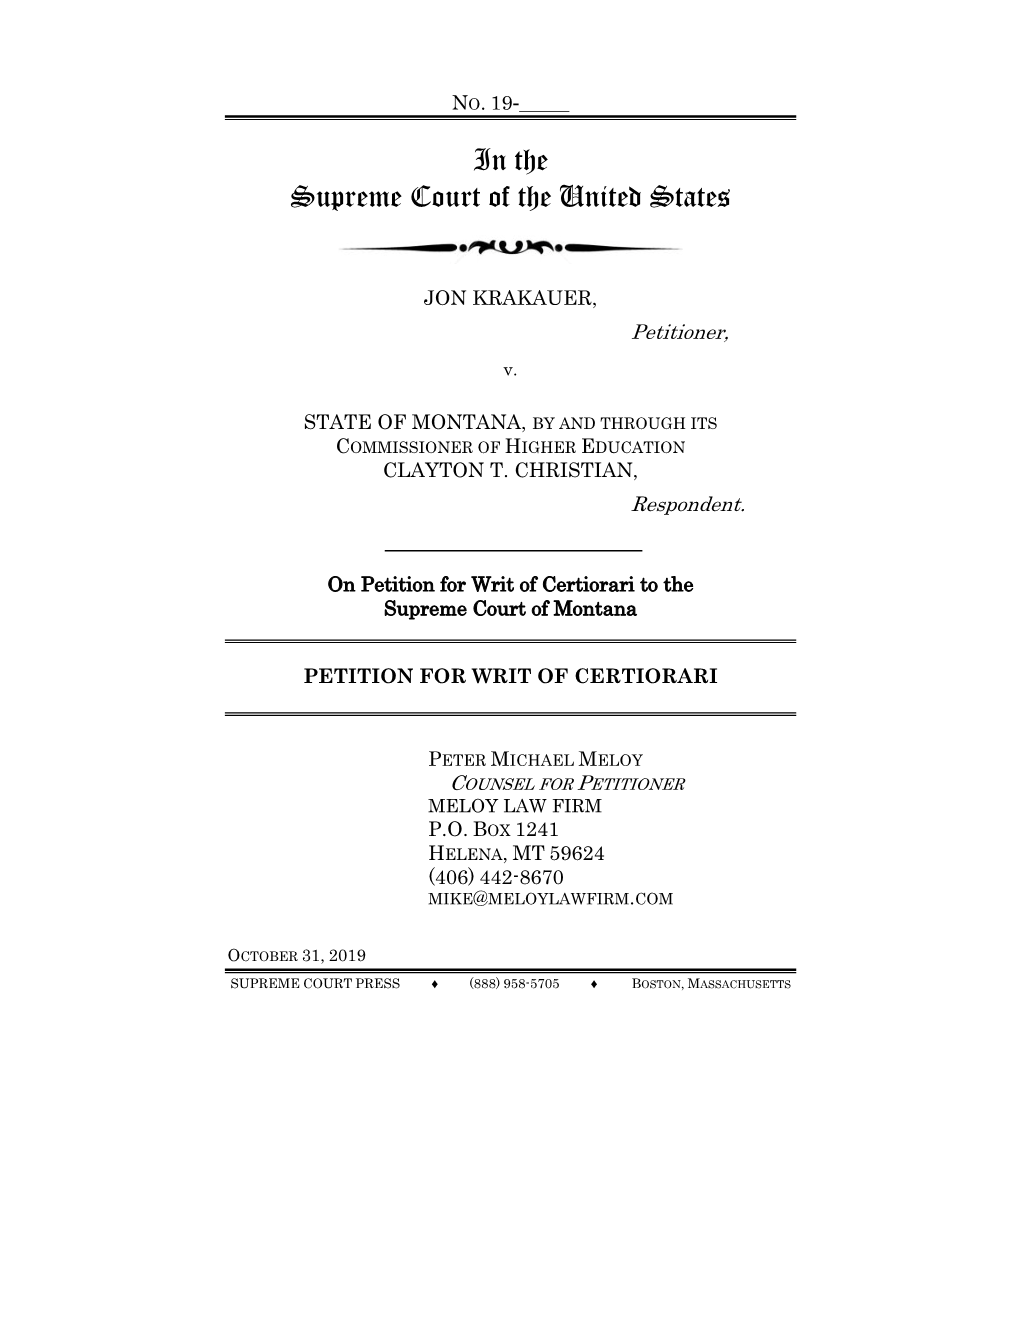 Petition for Writ of Certiorari to the Supreme Court of Montana